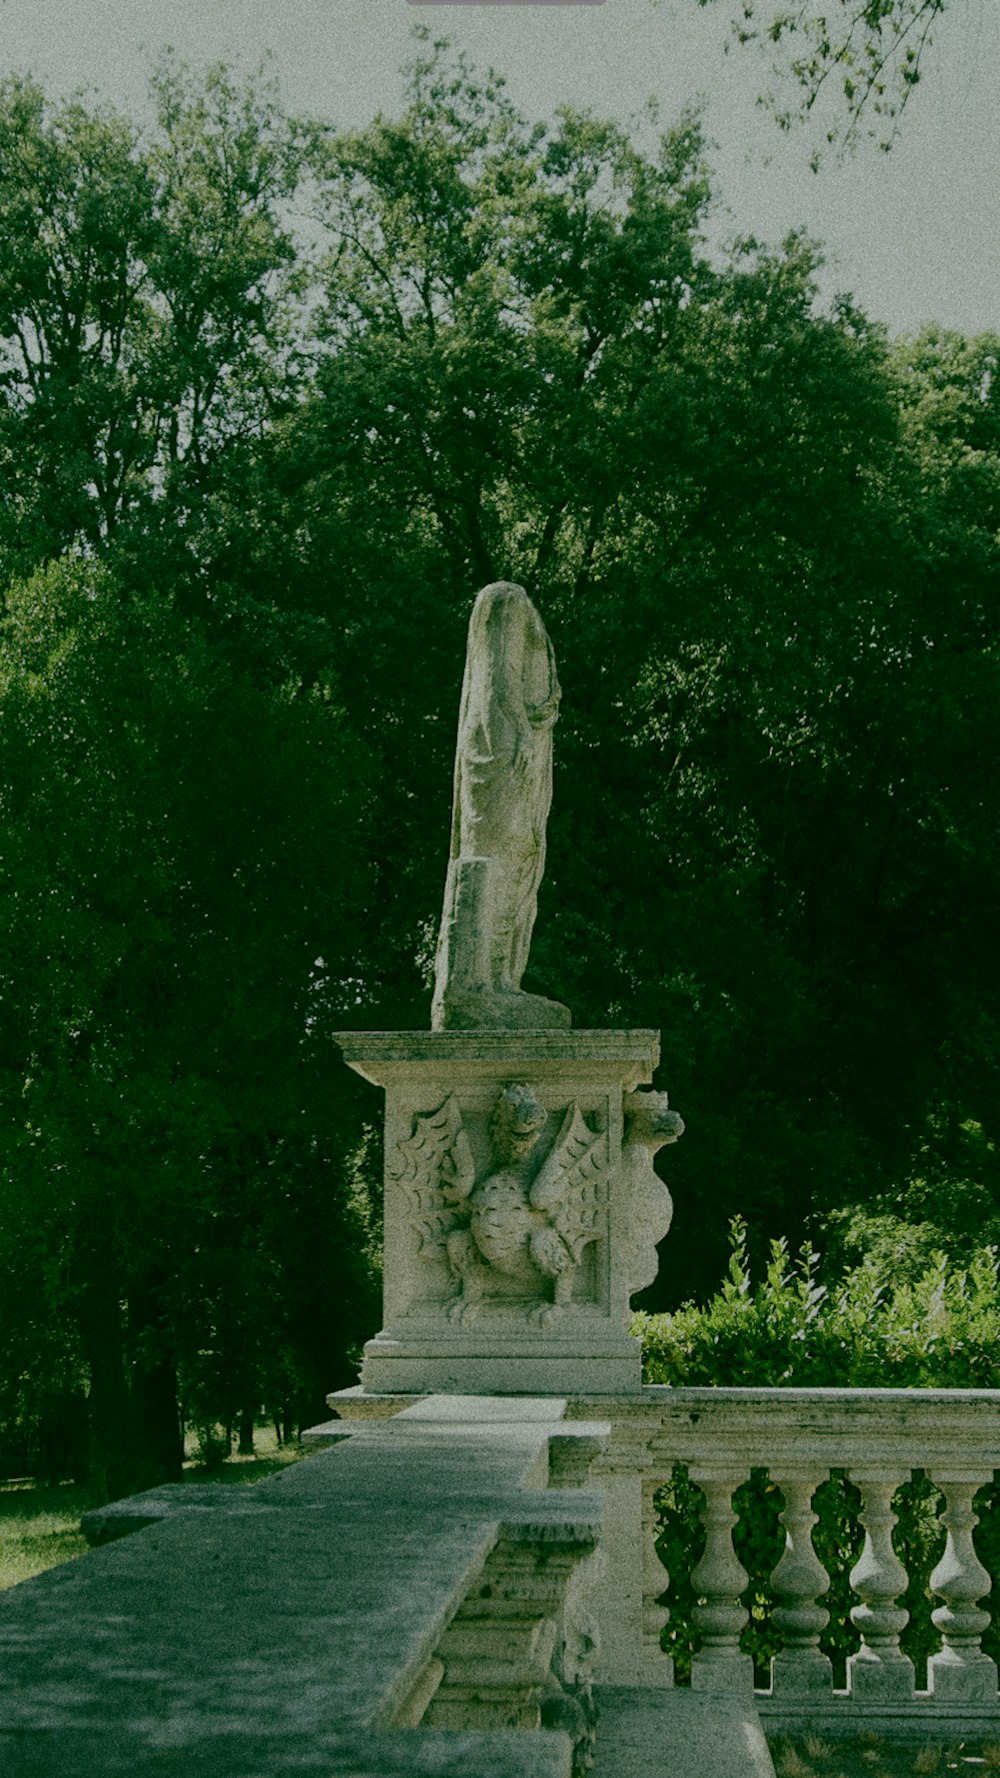 a statue of a woman is in a park